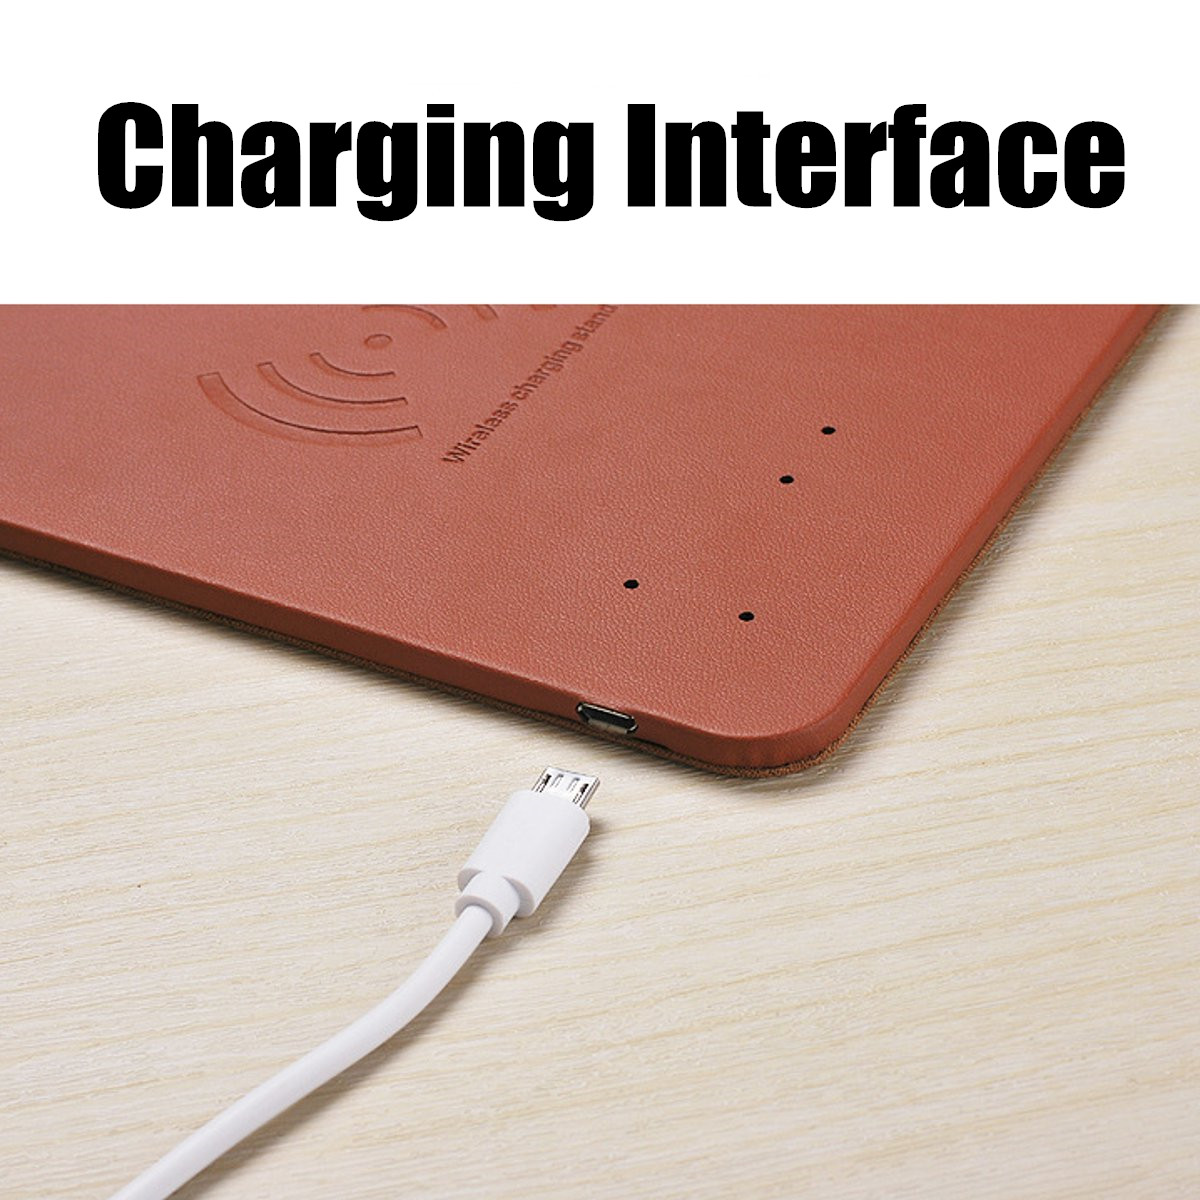 Imitation Leather Mobile Phones Wireless Fast Charger Mouse Pad Qi Wireless Charging 11